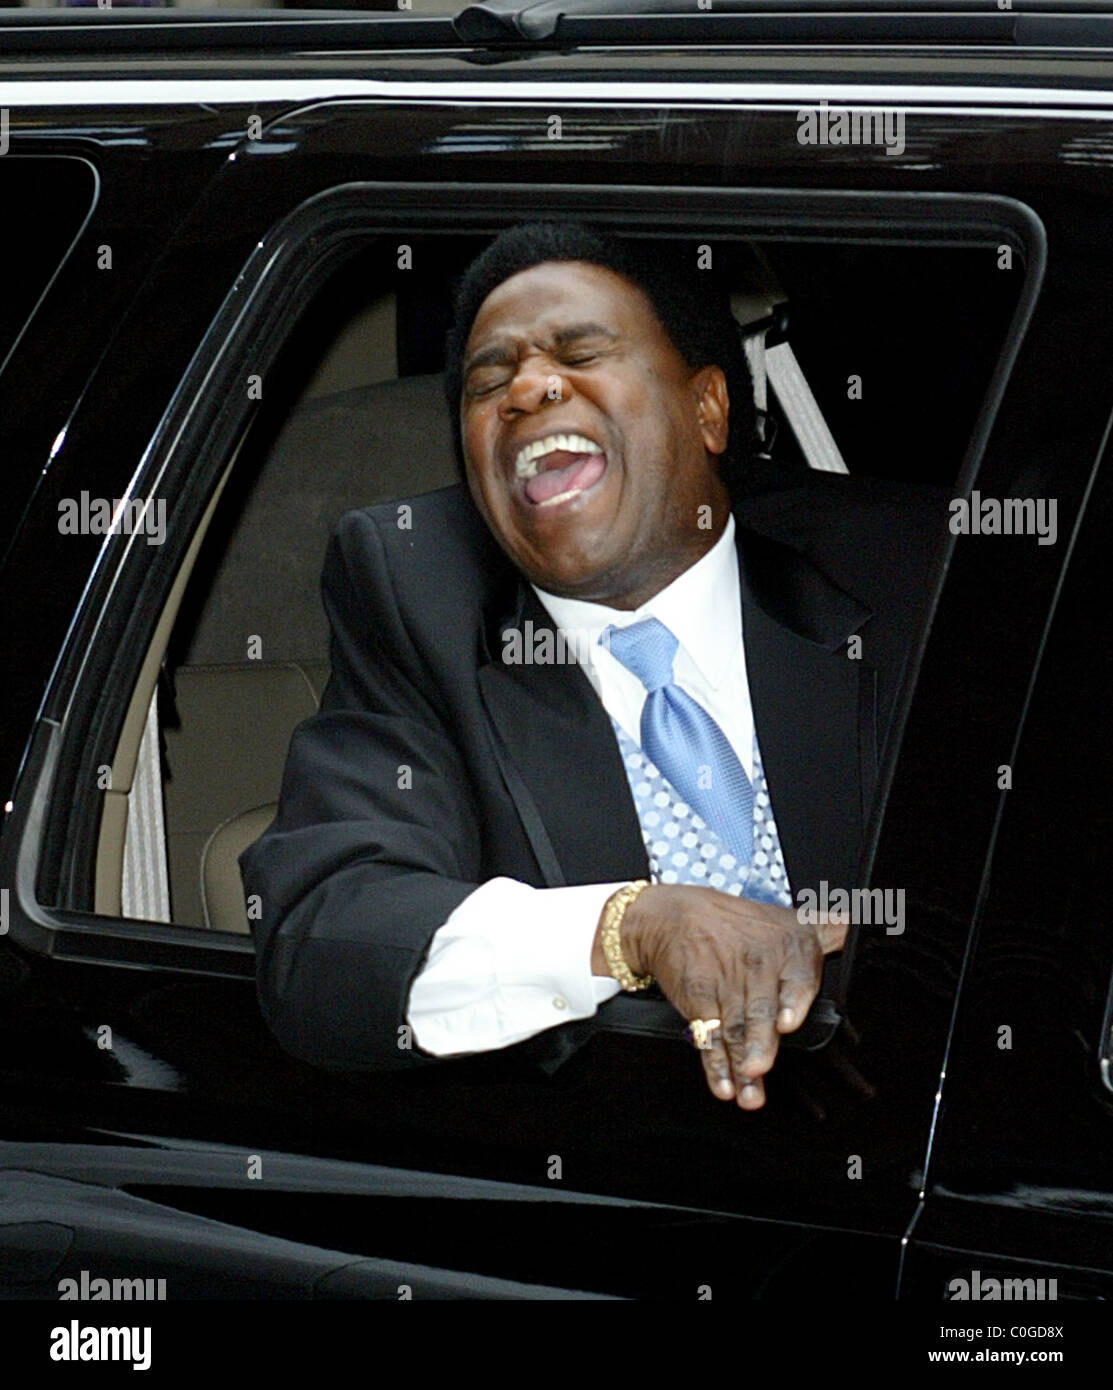 Singer Al Green outside the Ed Sullivan Theatre for ' 'Late Show With David Letterman' show New York City, USA - 05.06.08 Stock Photo